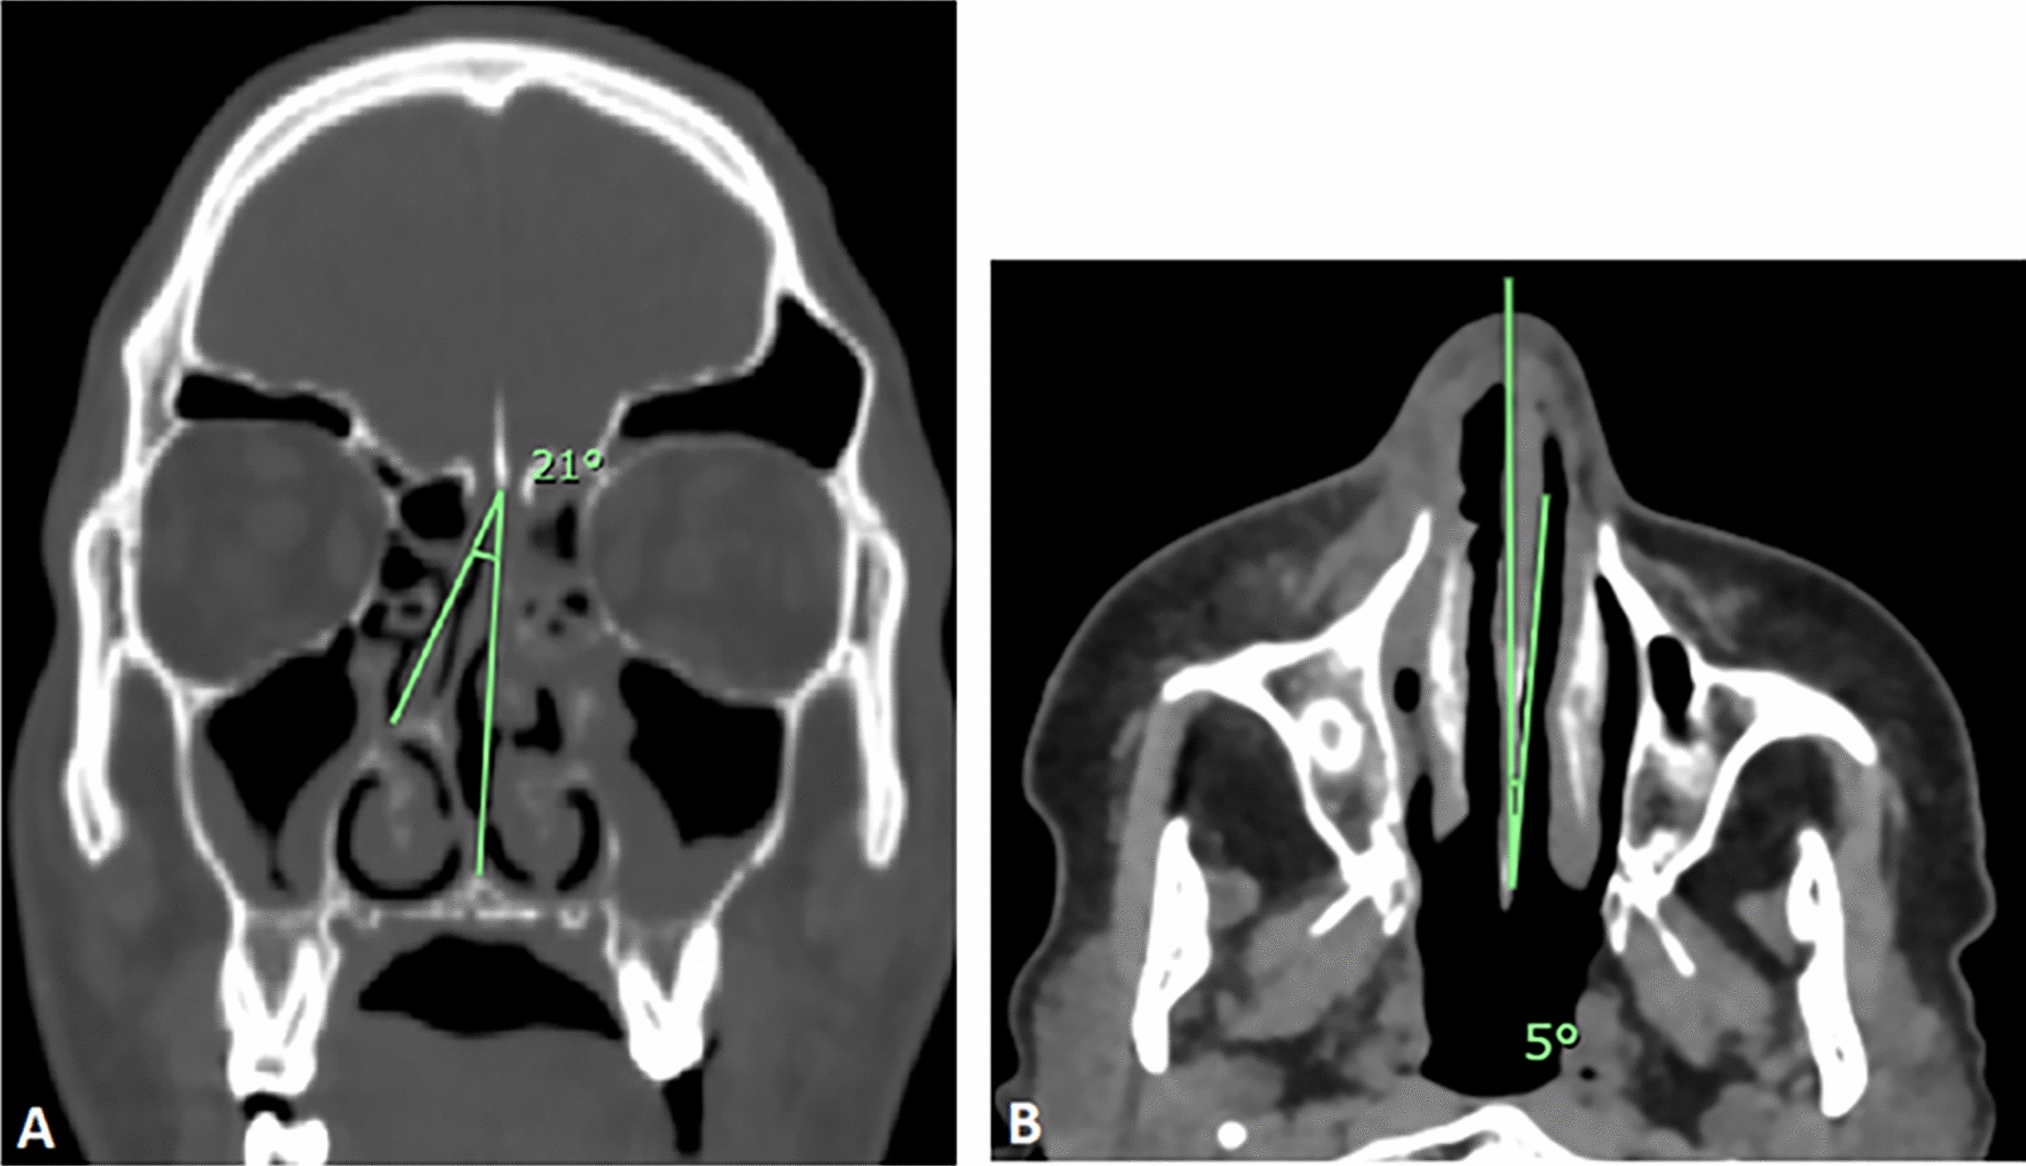 Nasal Septum Deviation in Patients with Acute Invasive Fungal Rhinosinusitis in a Tertiary Care Hospital: A Cross-Sectional Study